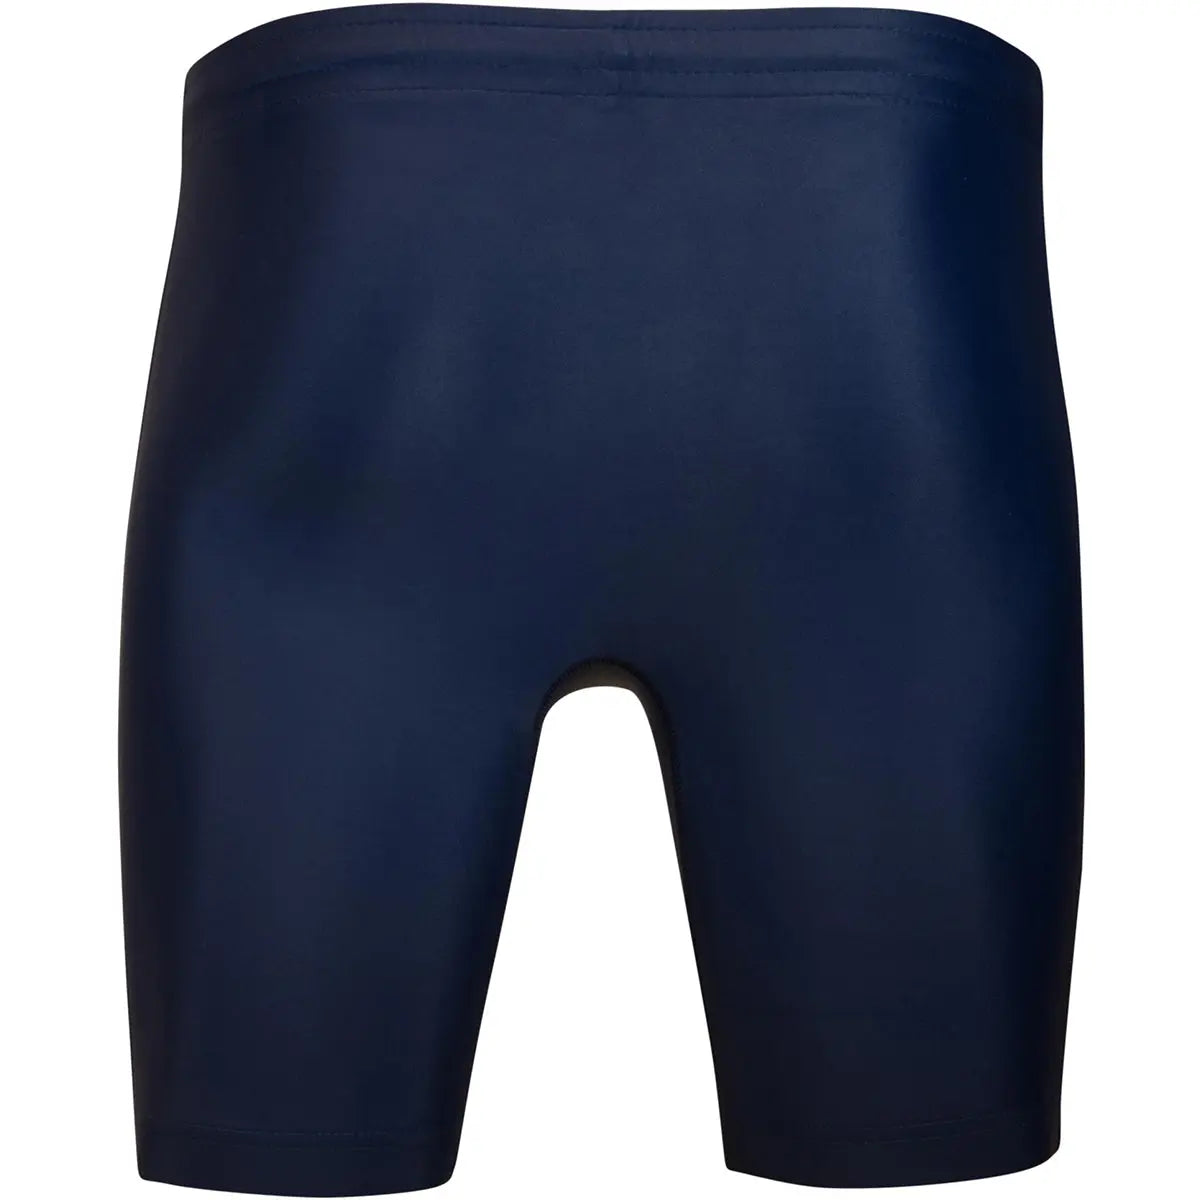 Cliff Keen Compression Gear Workout Shorts - Navy Cliff Keen